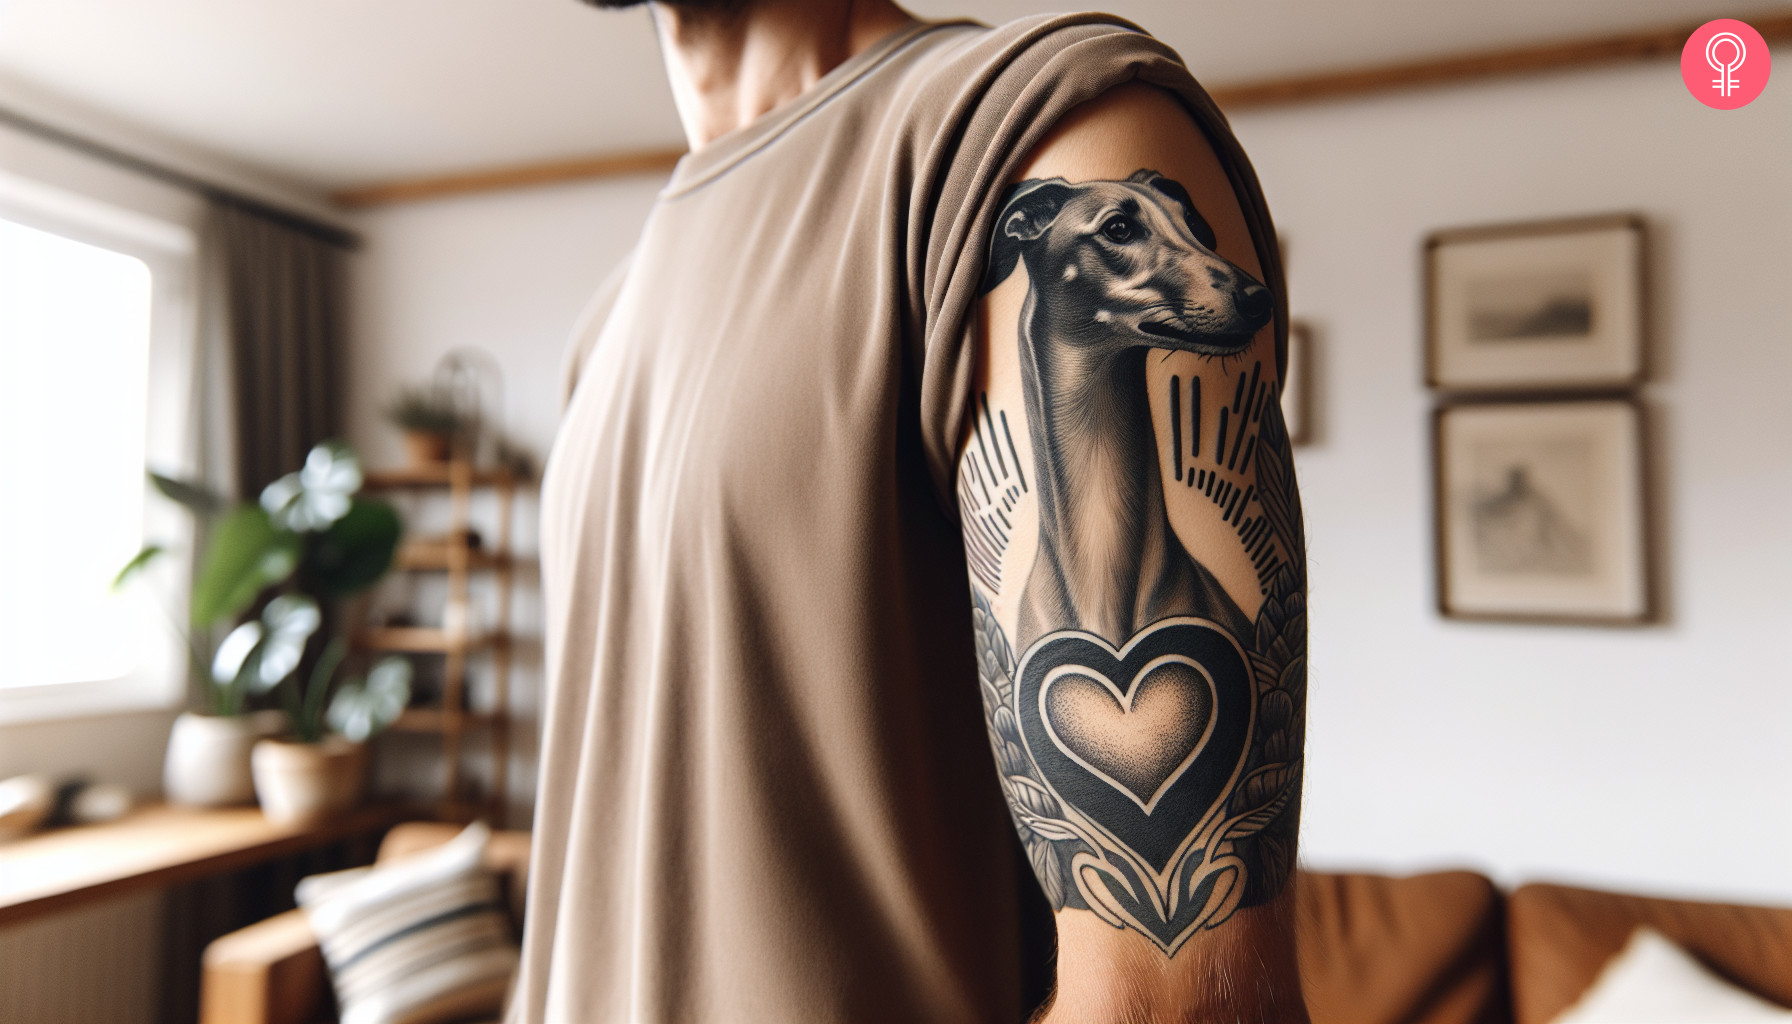 A black and gray greyhound heart tattoo on the upper arm of a man